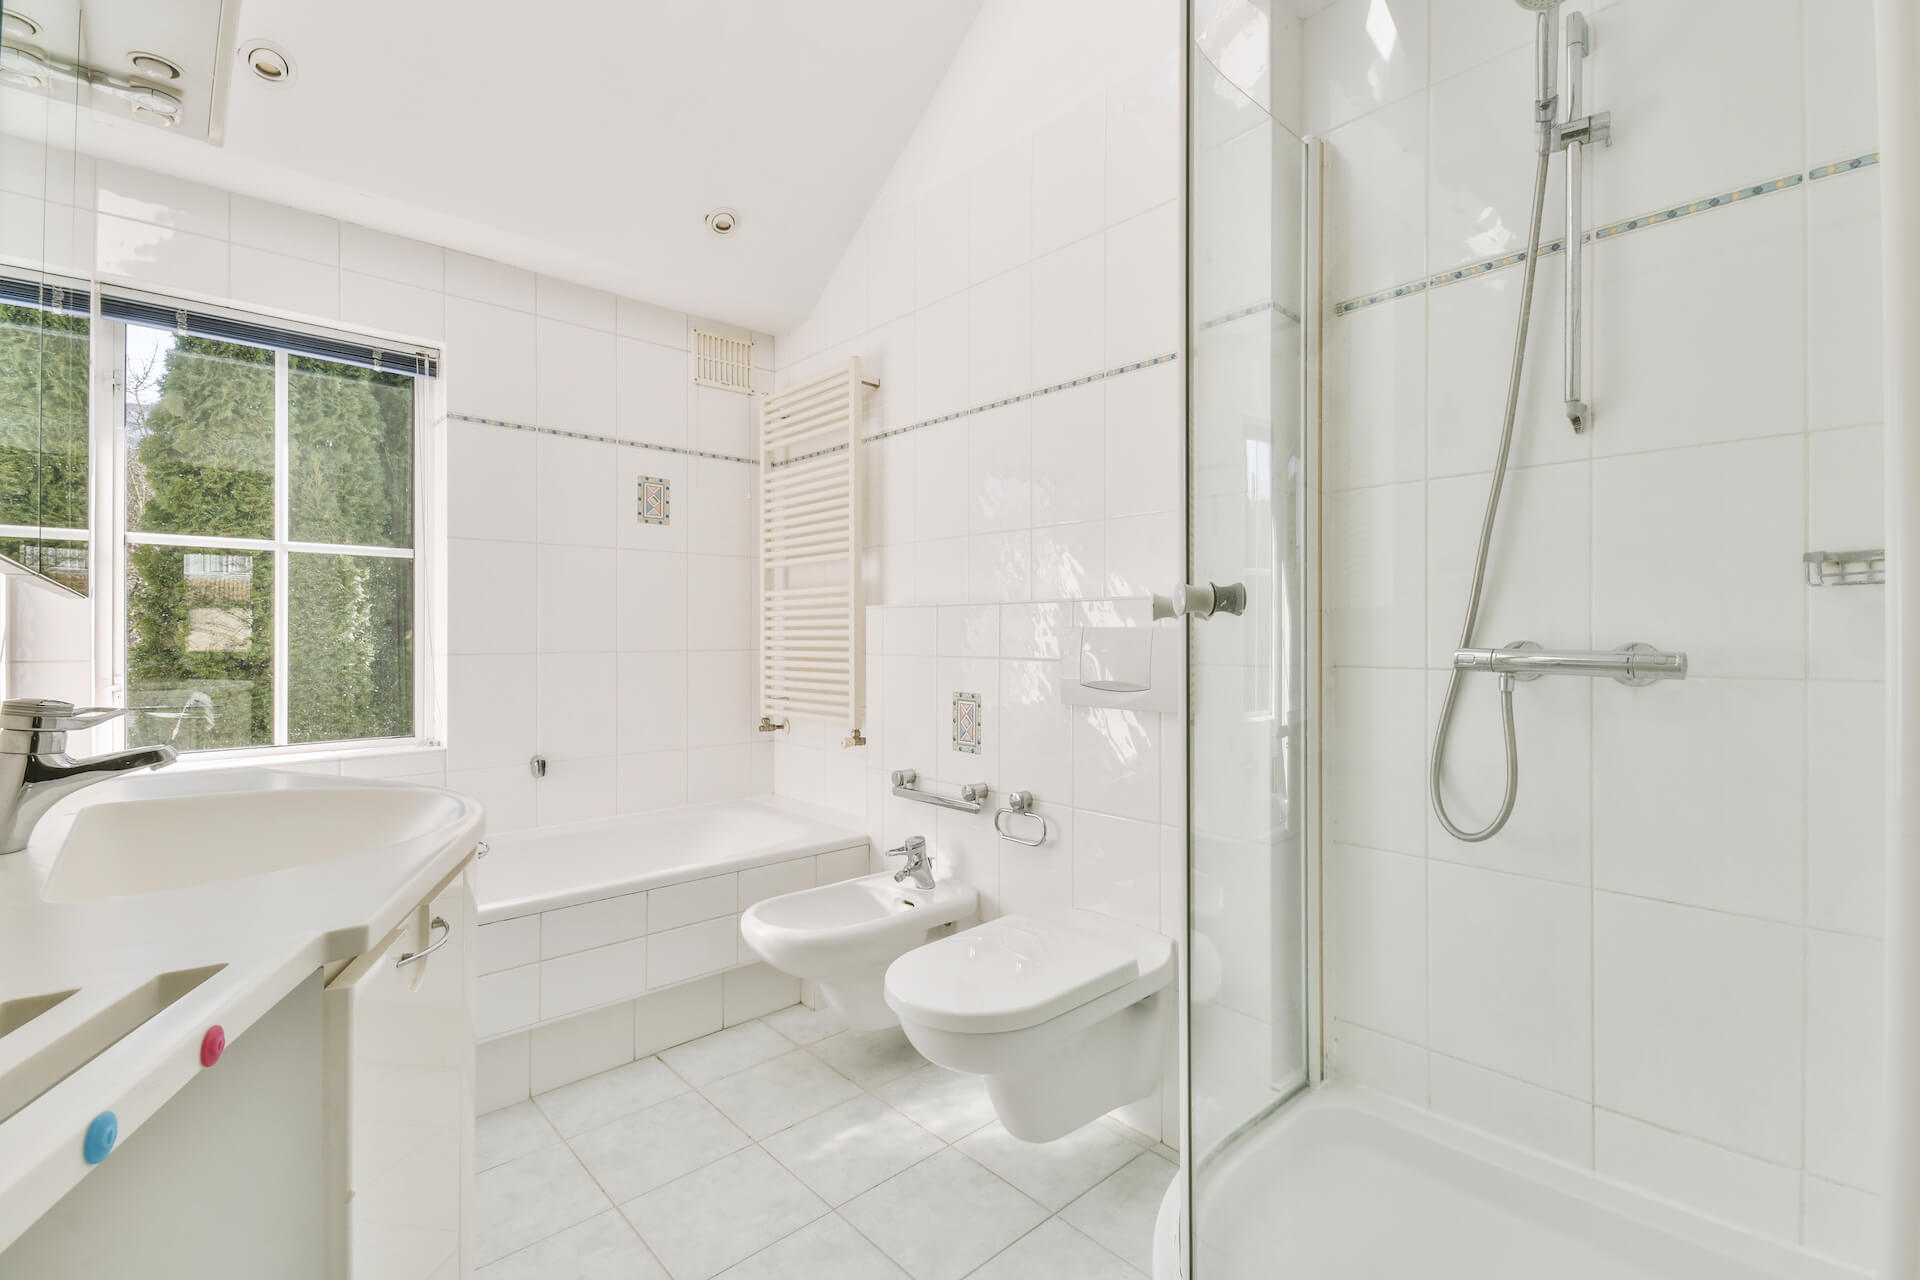 Photo of a white tiled modern bathroom | Featured image for The Modern Bathroom Accessories blog by Akins Plumbing.